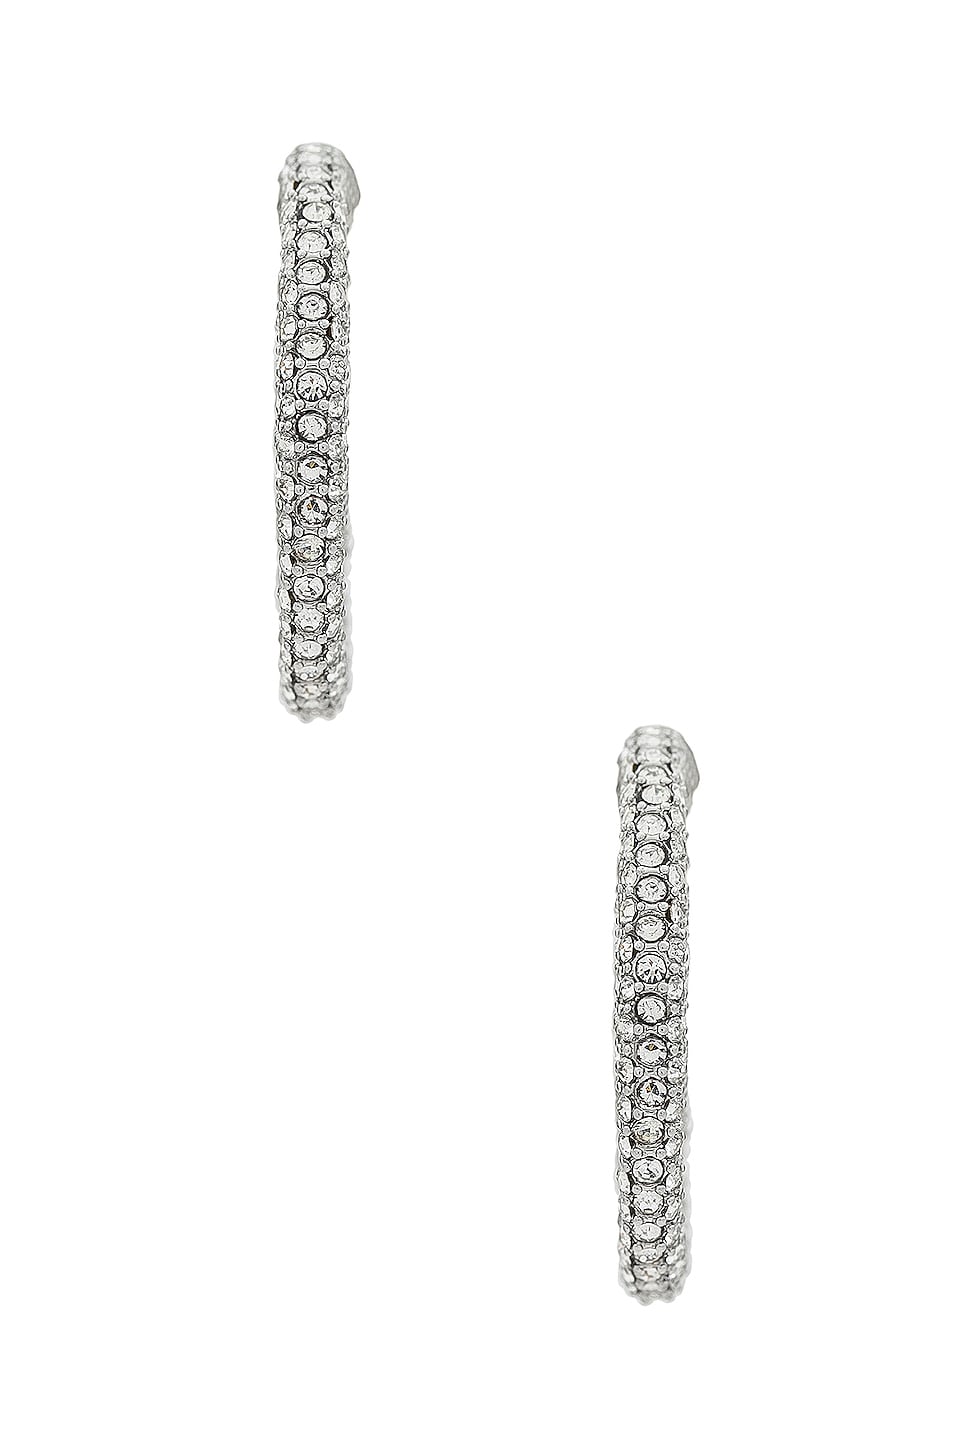 Marc Jacobs J Marc Small Crystal Hoop in Silver & Crystal | REVOLVE